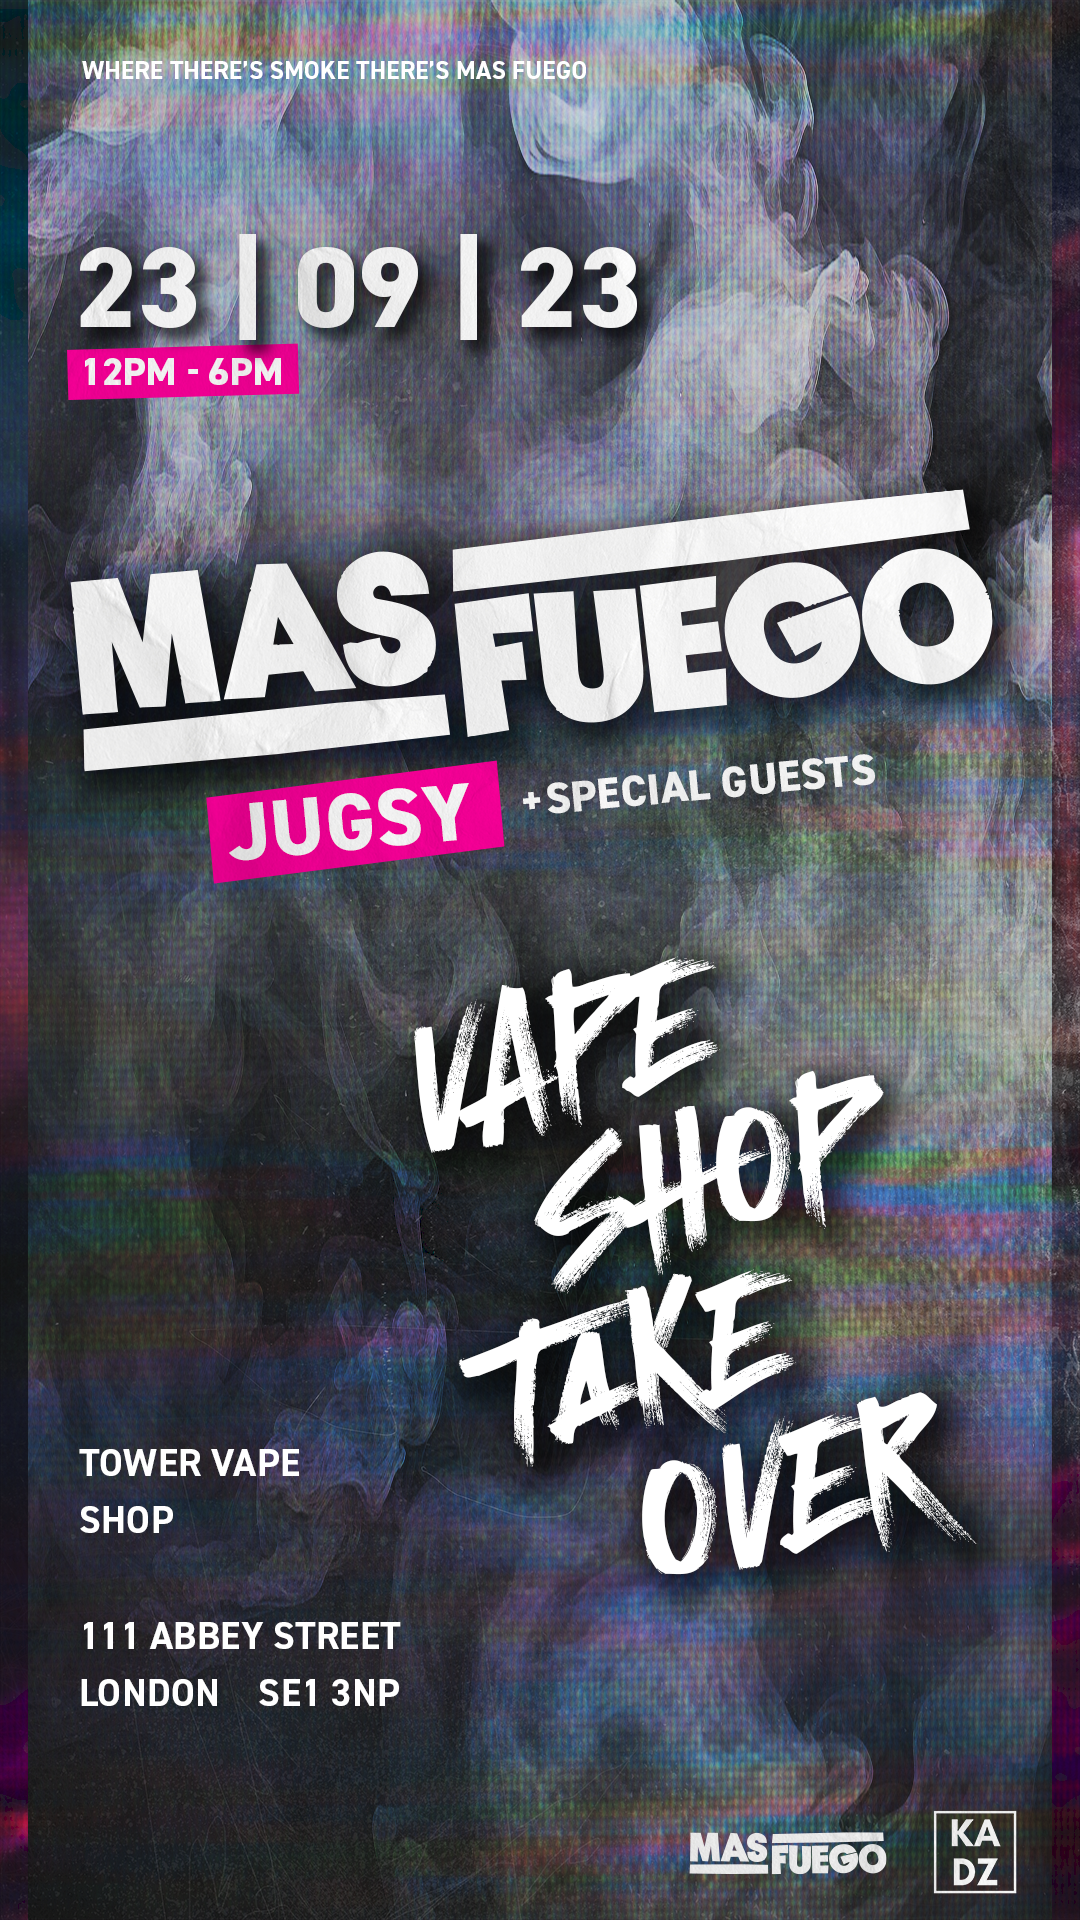 TOWER VAPE SHOP TAKEOVER with Mas Fuego & Special Guests - フライヤー表